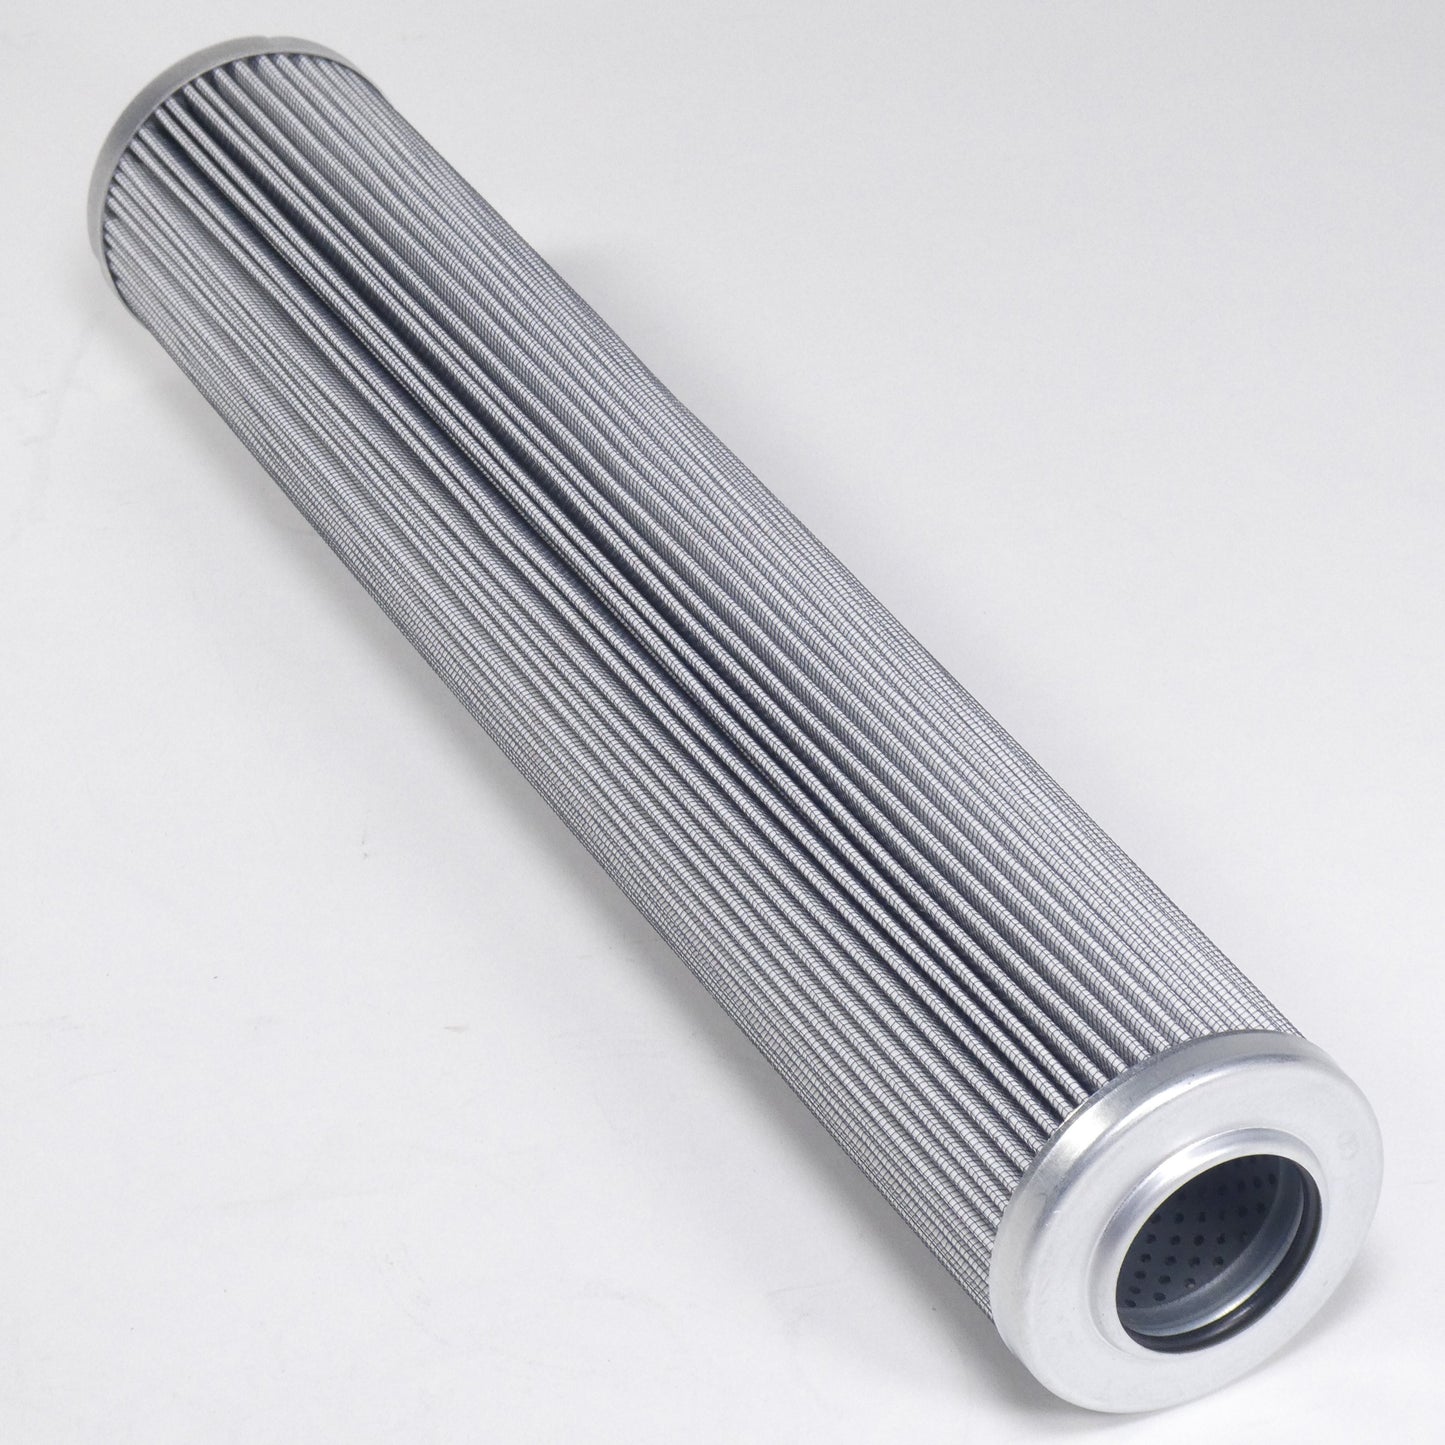 Hydrafil Replacement Filter Element for Caterpillar 3i1515